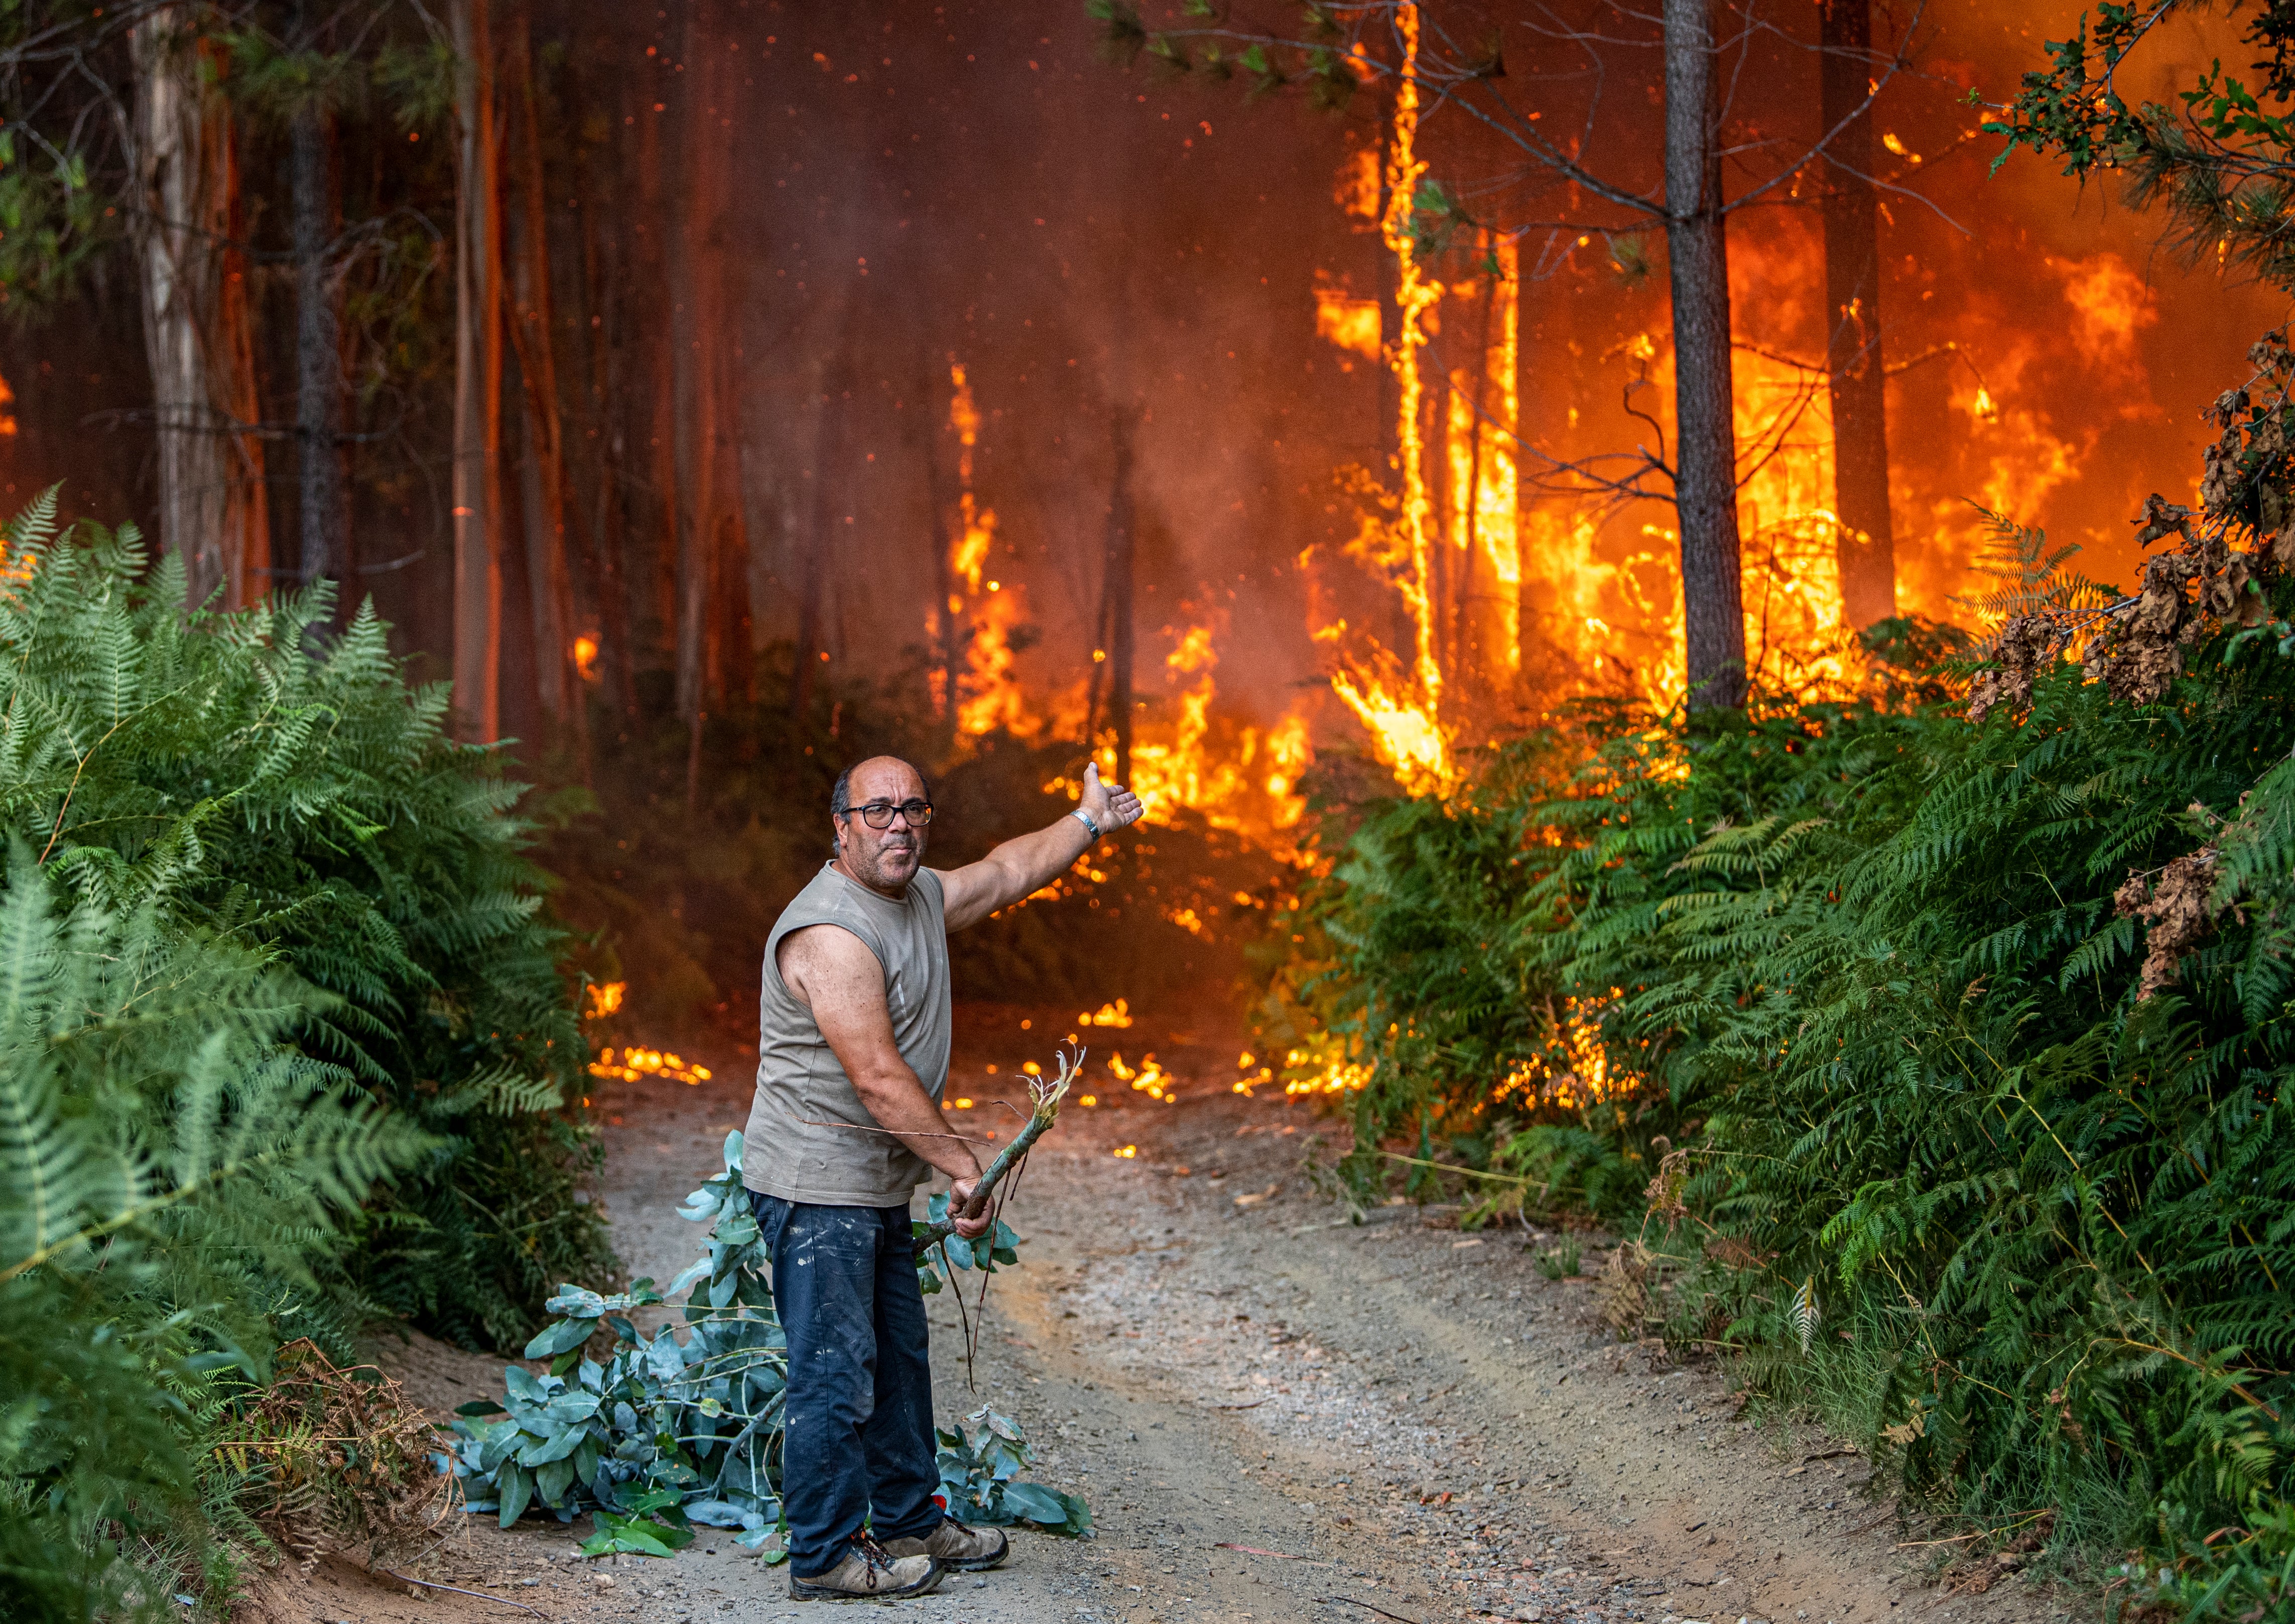 A resident reacts to a fire burning near his home in Albergaria a Velha, Portugal, on July 13, 2022. (Photo: Octavio Passos, Getty Images)